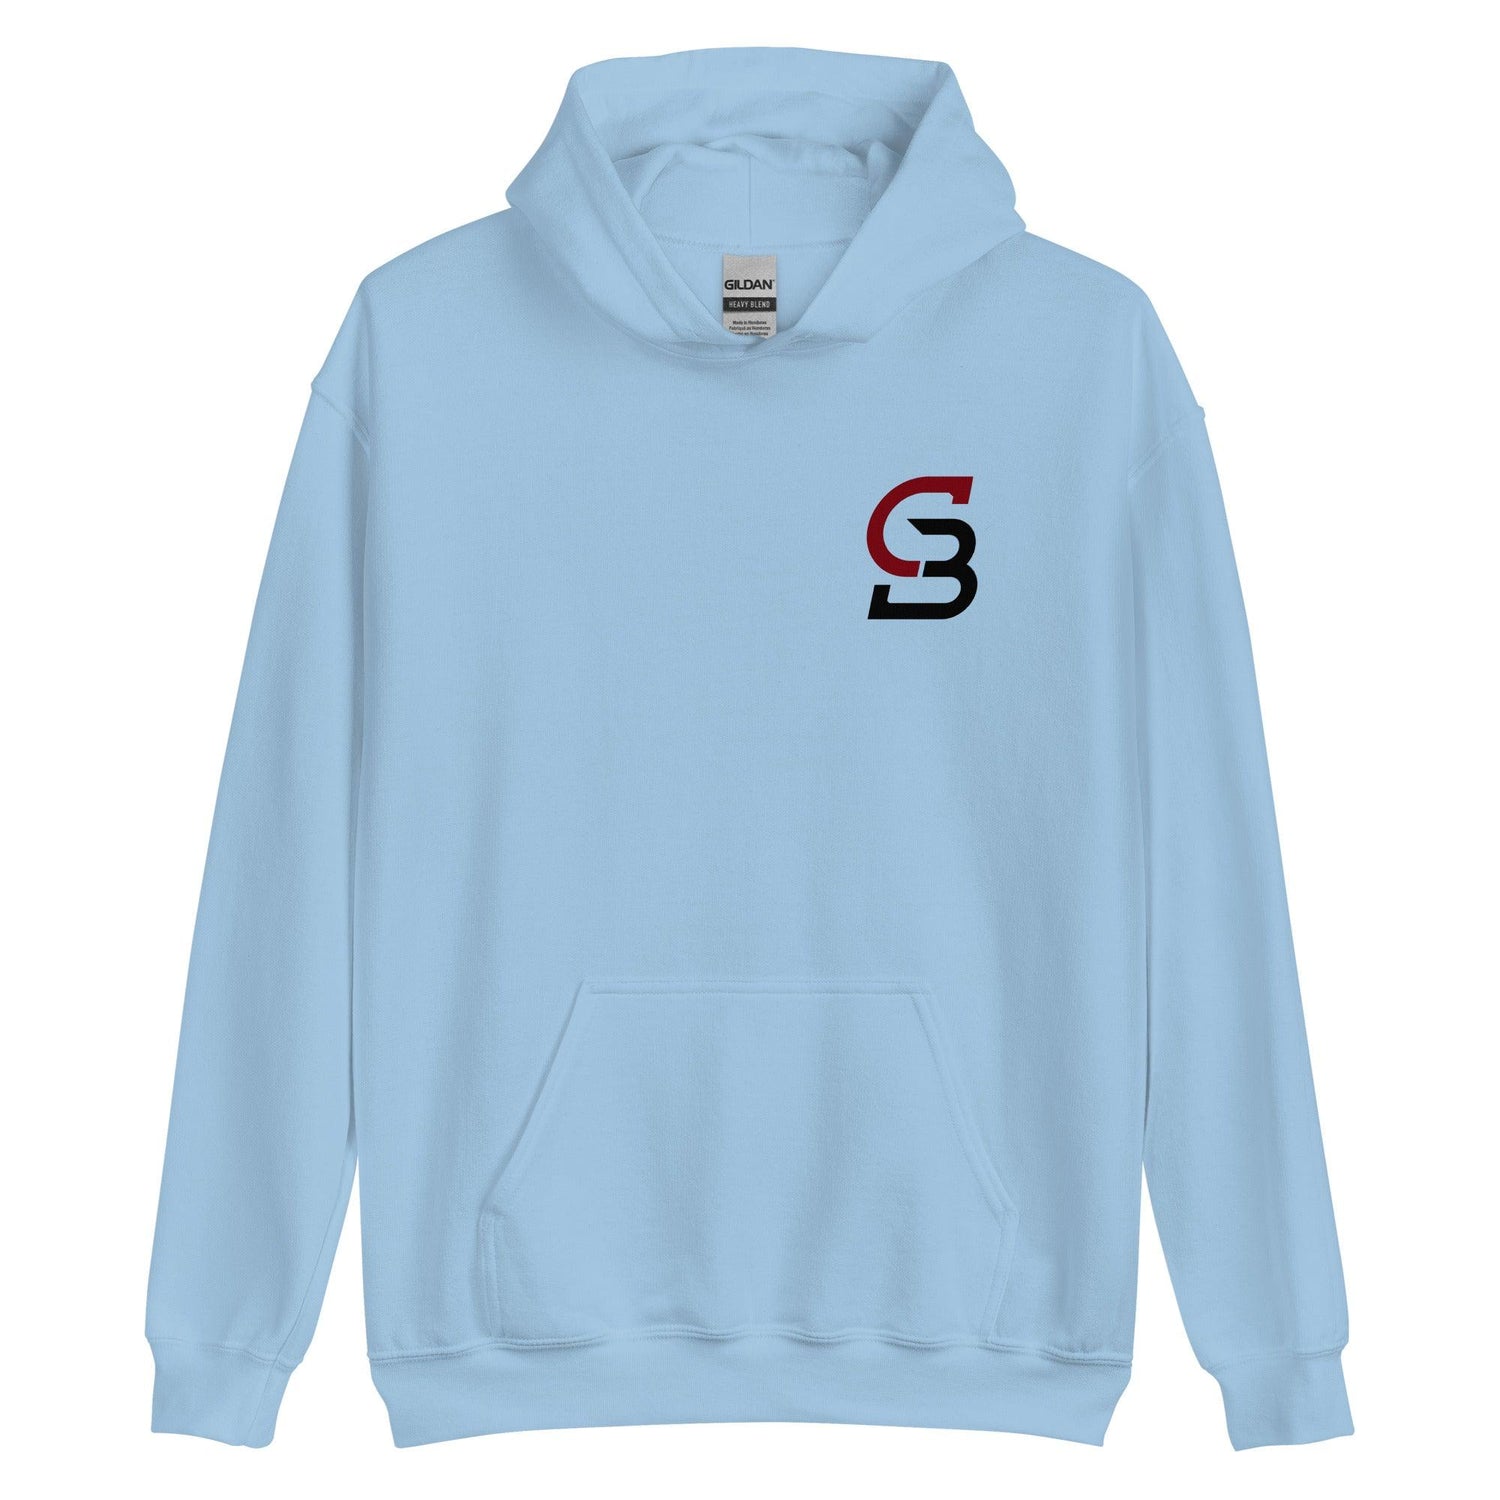 Catherine Barry "Signature" Hoodie - Fan Arch